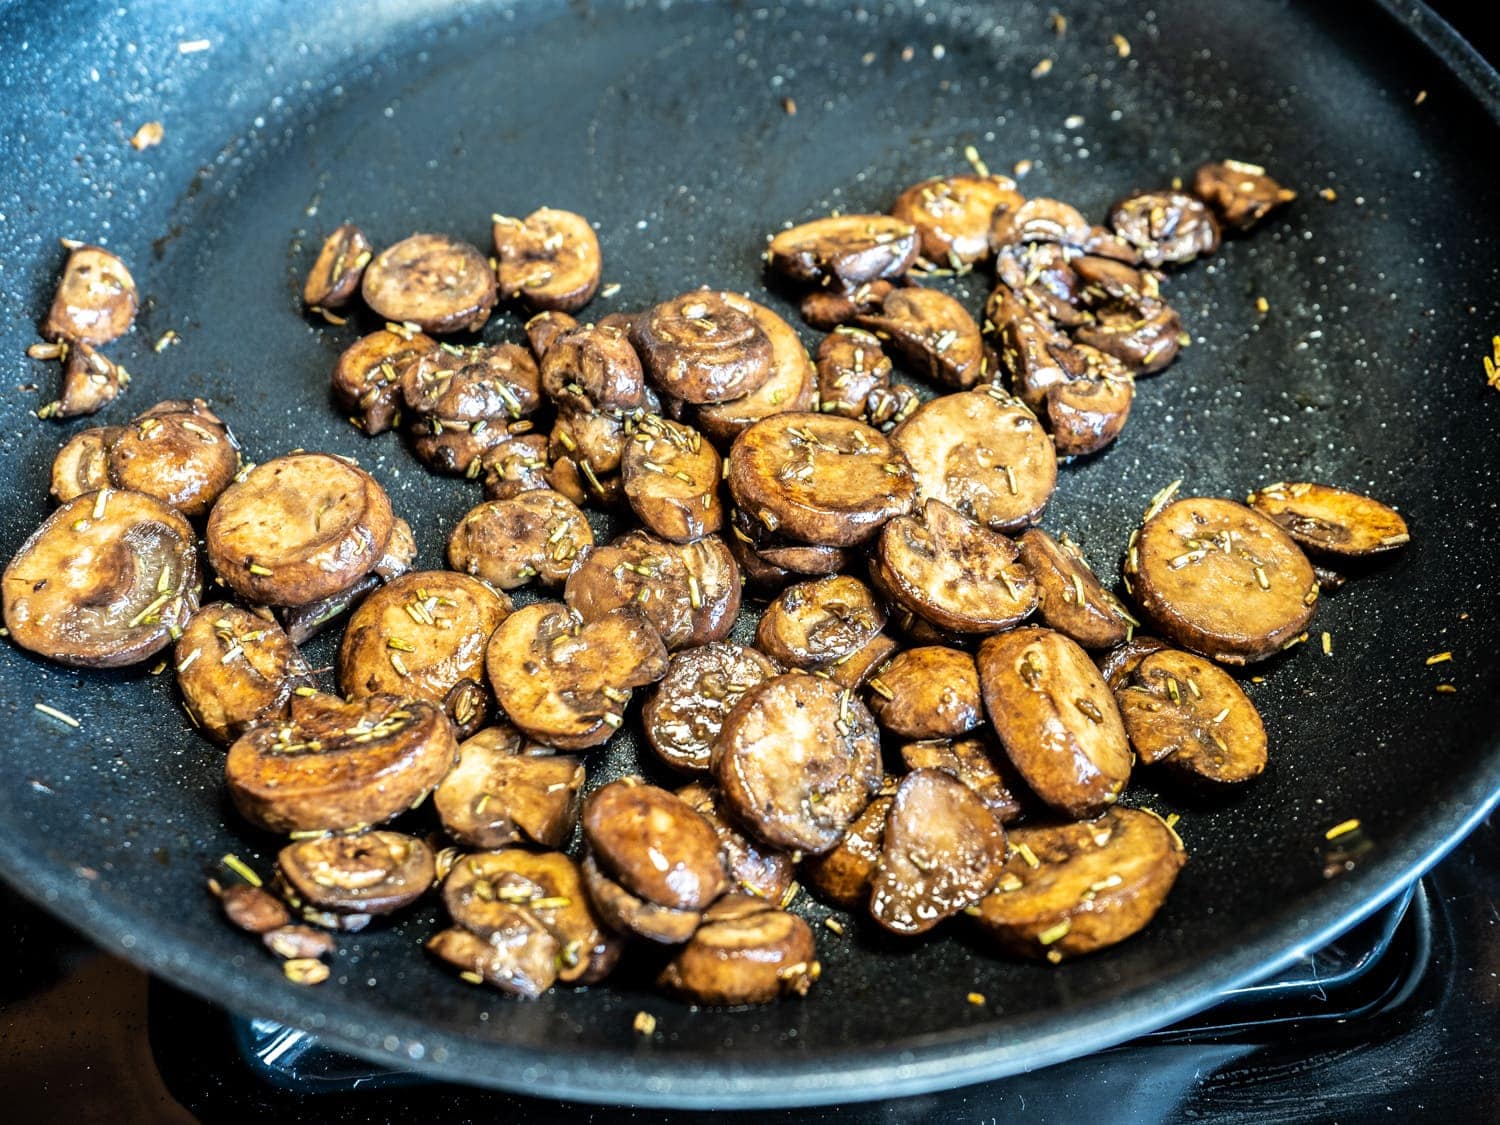 Mushrooms cooking in non-stick skillet